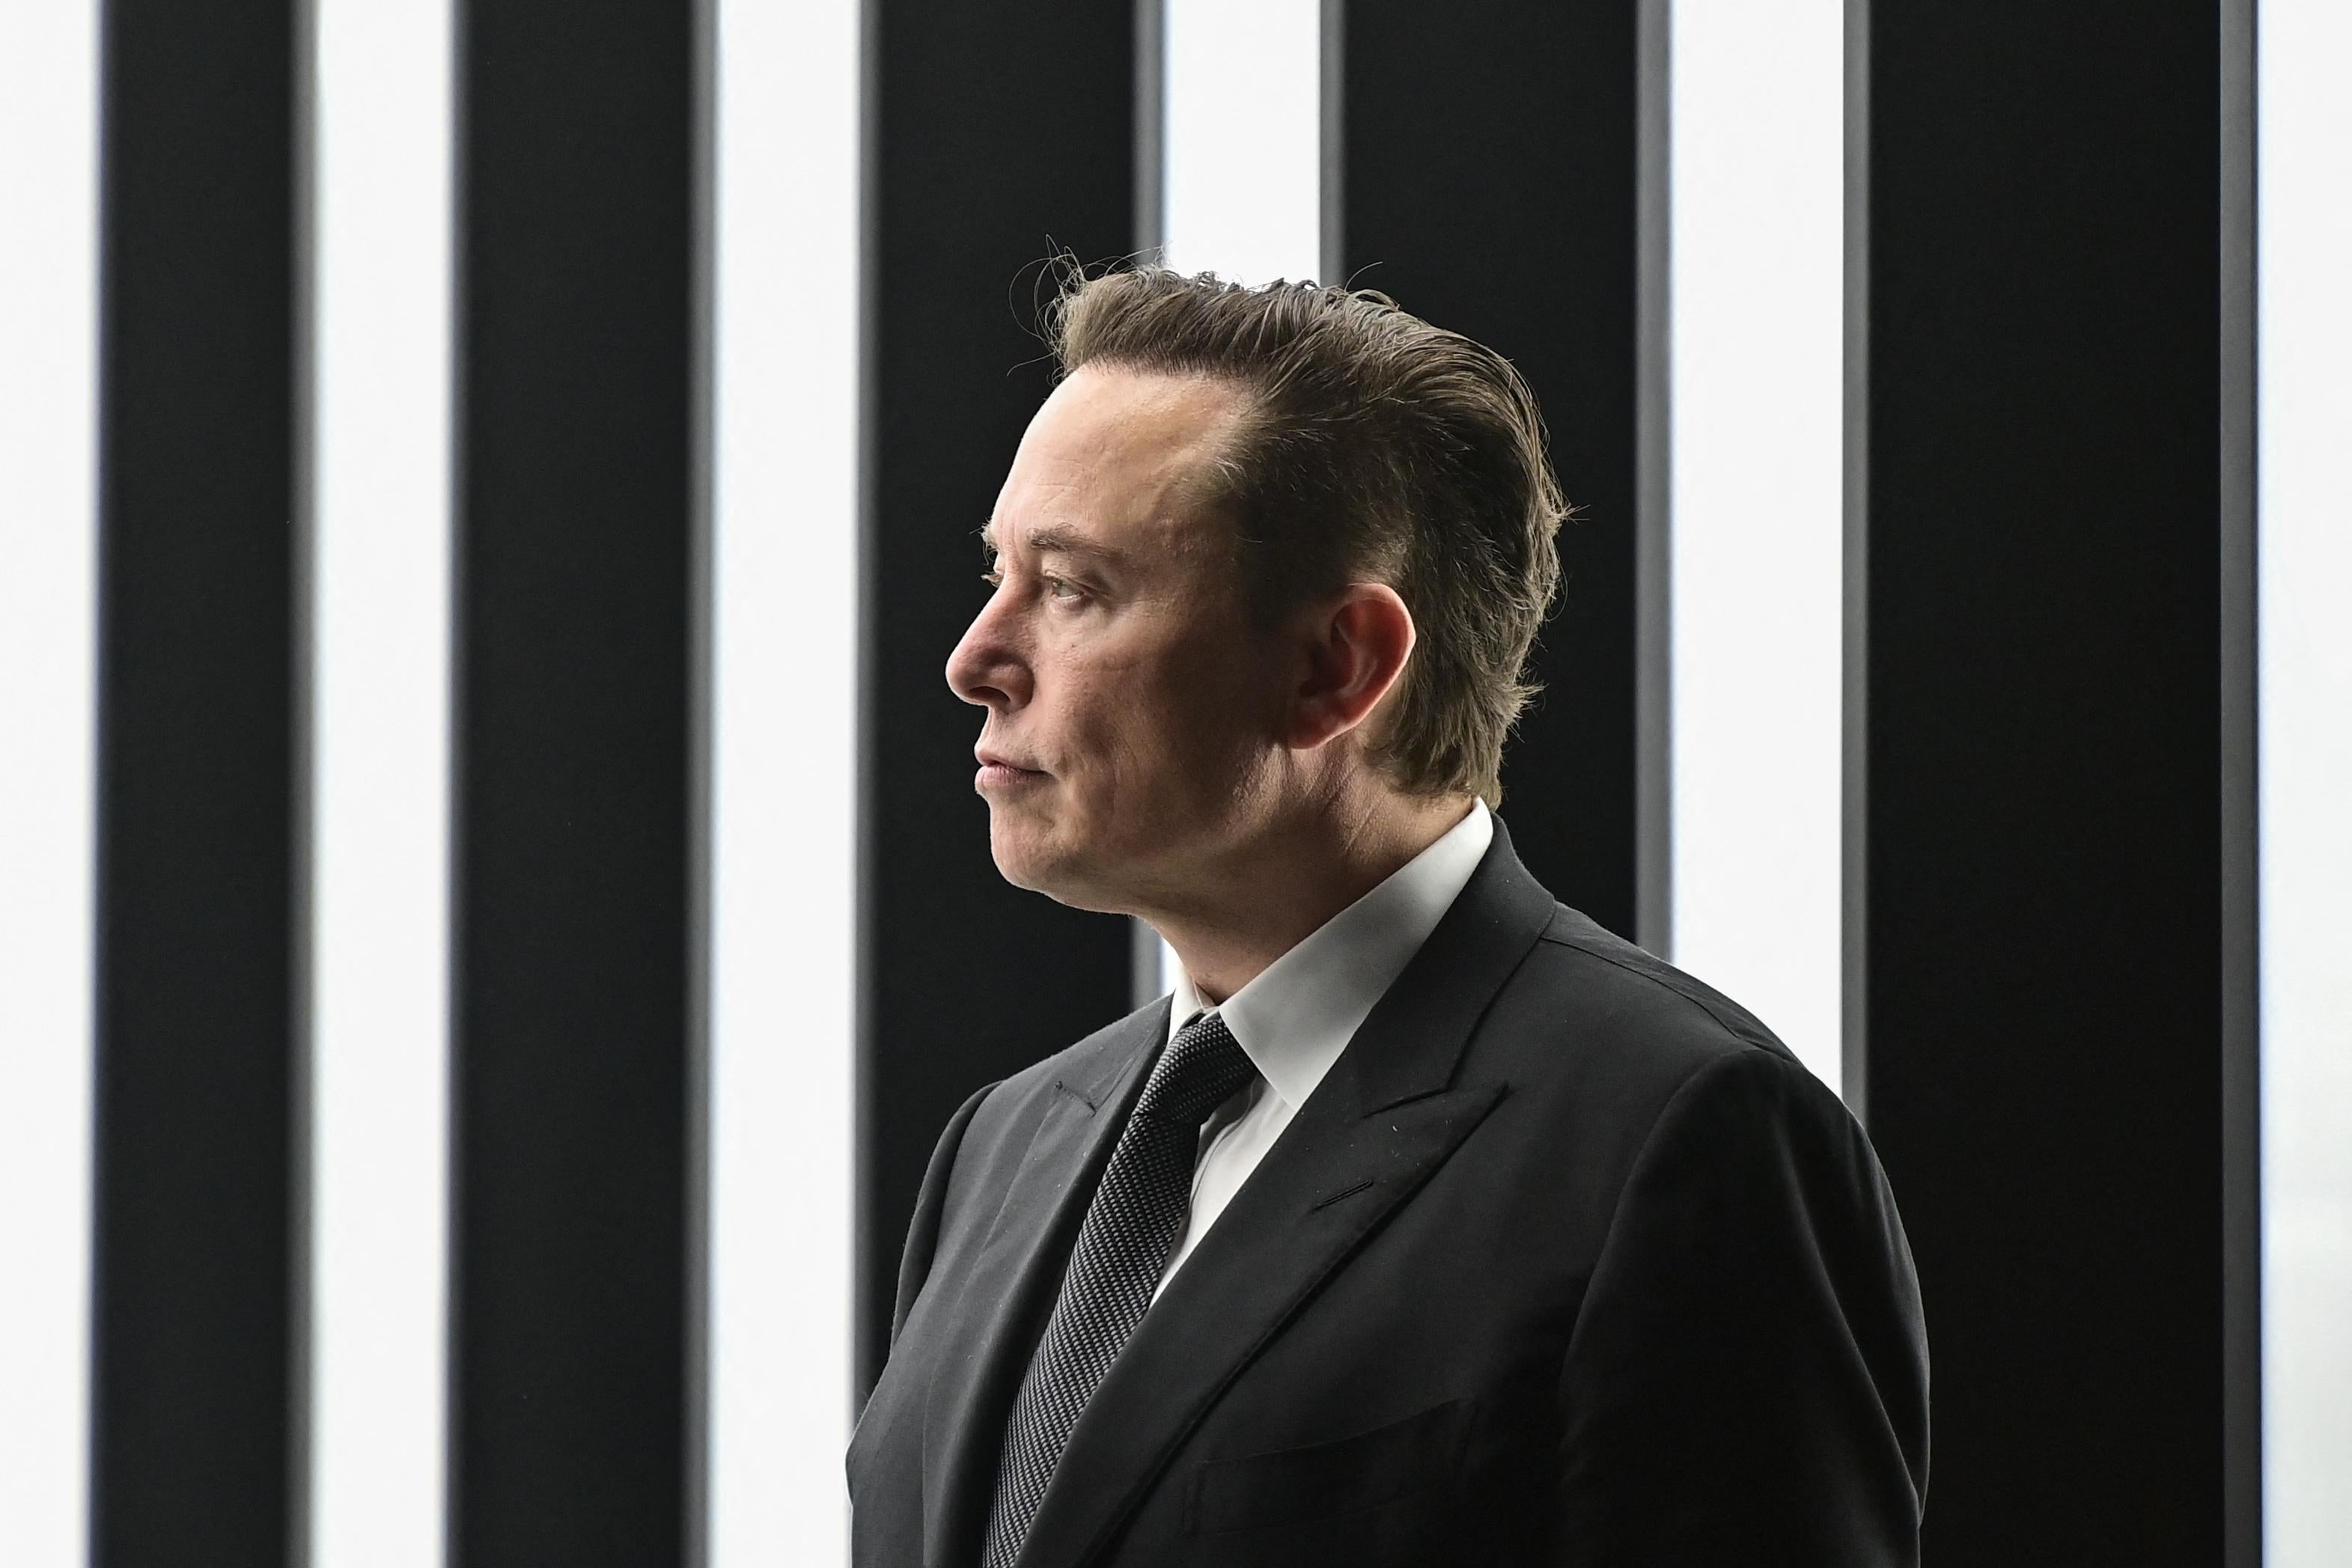 Elon Musk, wearing a suit, stands in front of a background of vertical black and white stripes.